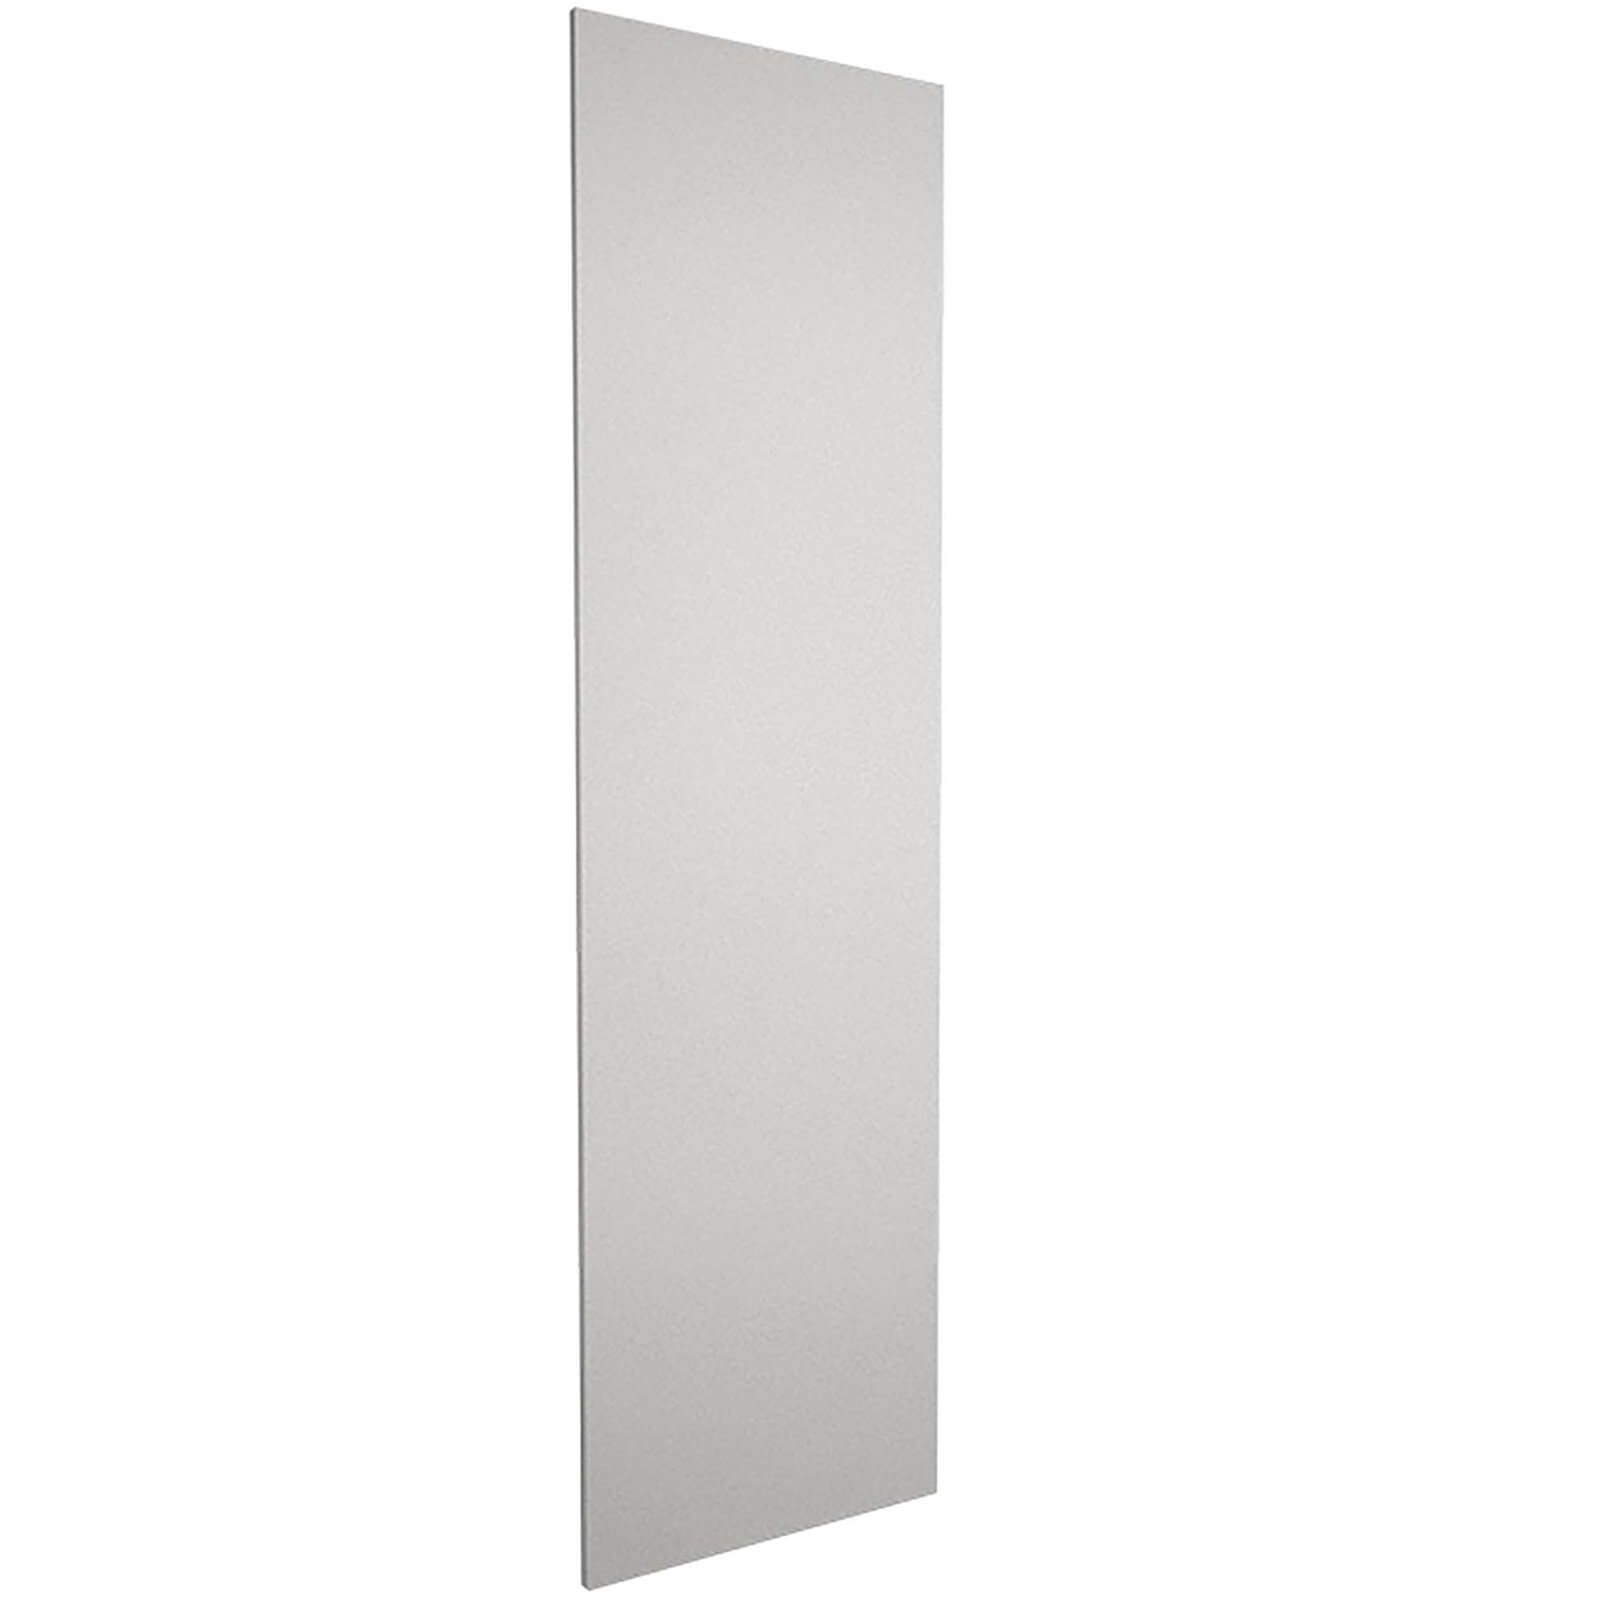 Photo of Clad On Tower Panel High Gloss Slab White- Handleless White Gloss Or Gloss Slab White